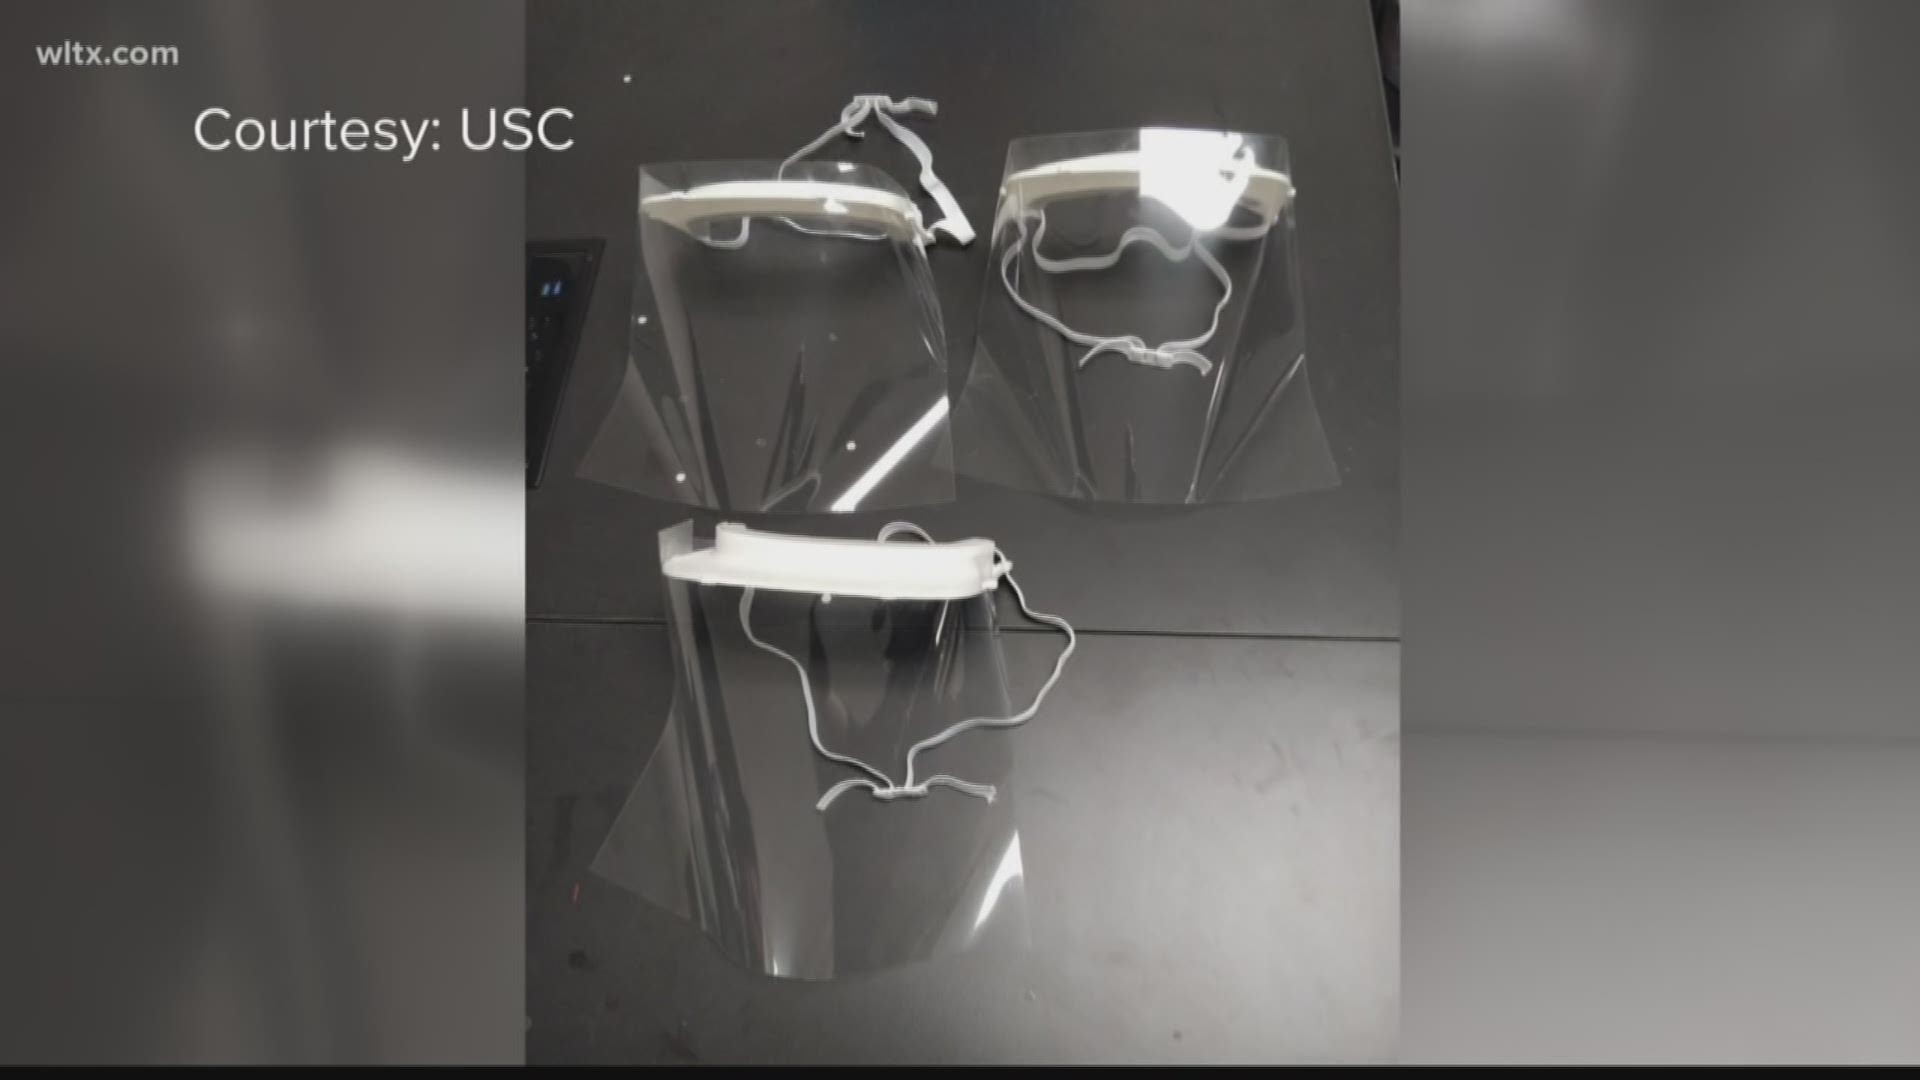 Students at the University of South Carolina are in the process of 3D printing hundreds of face shields for use at local hospitals.